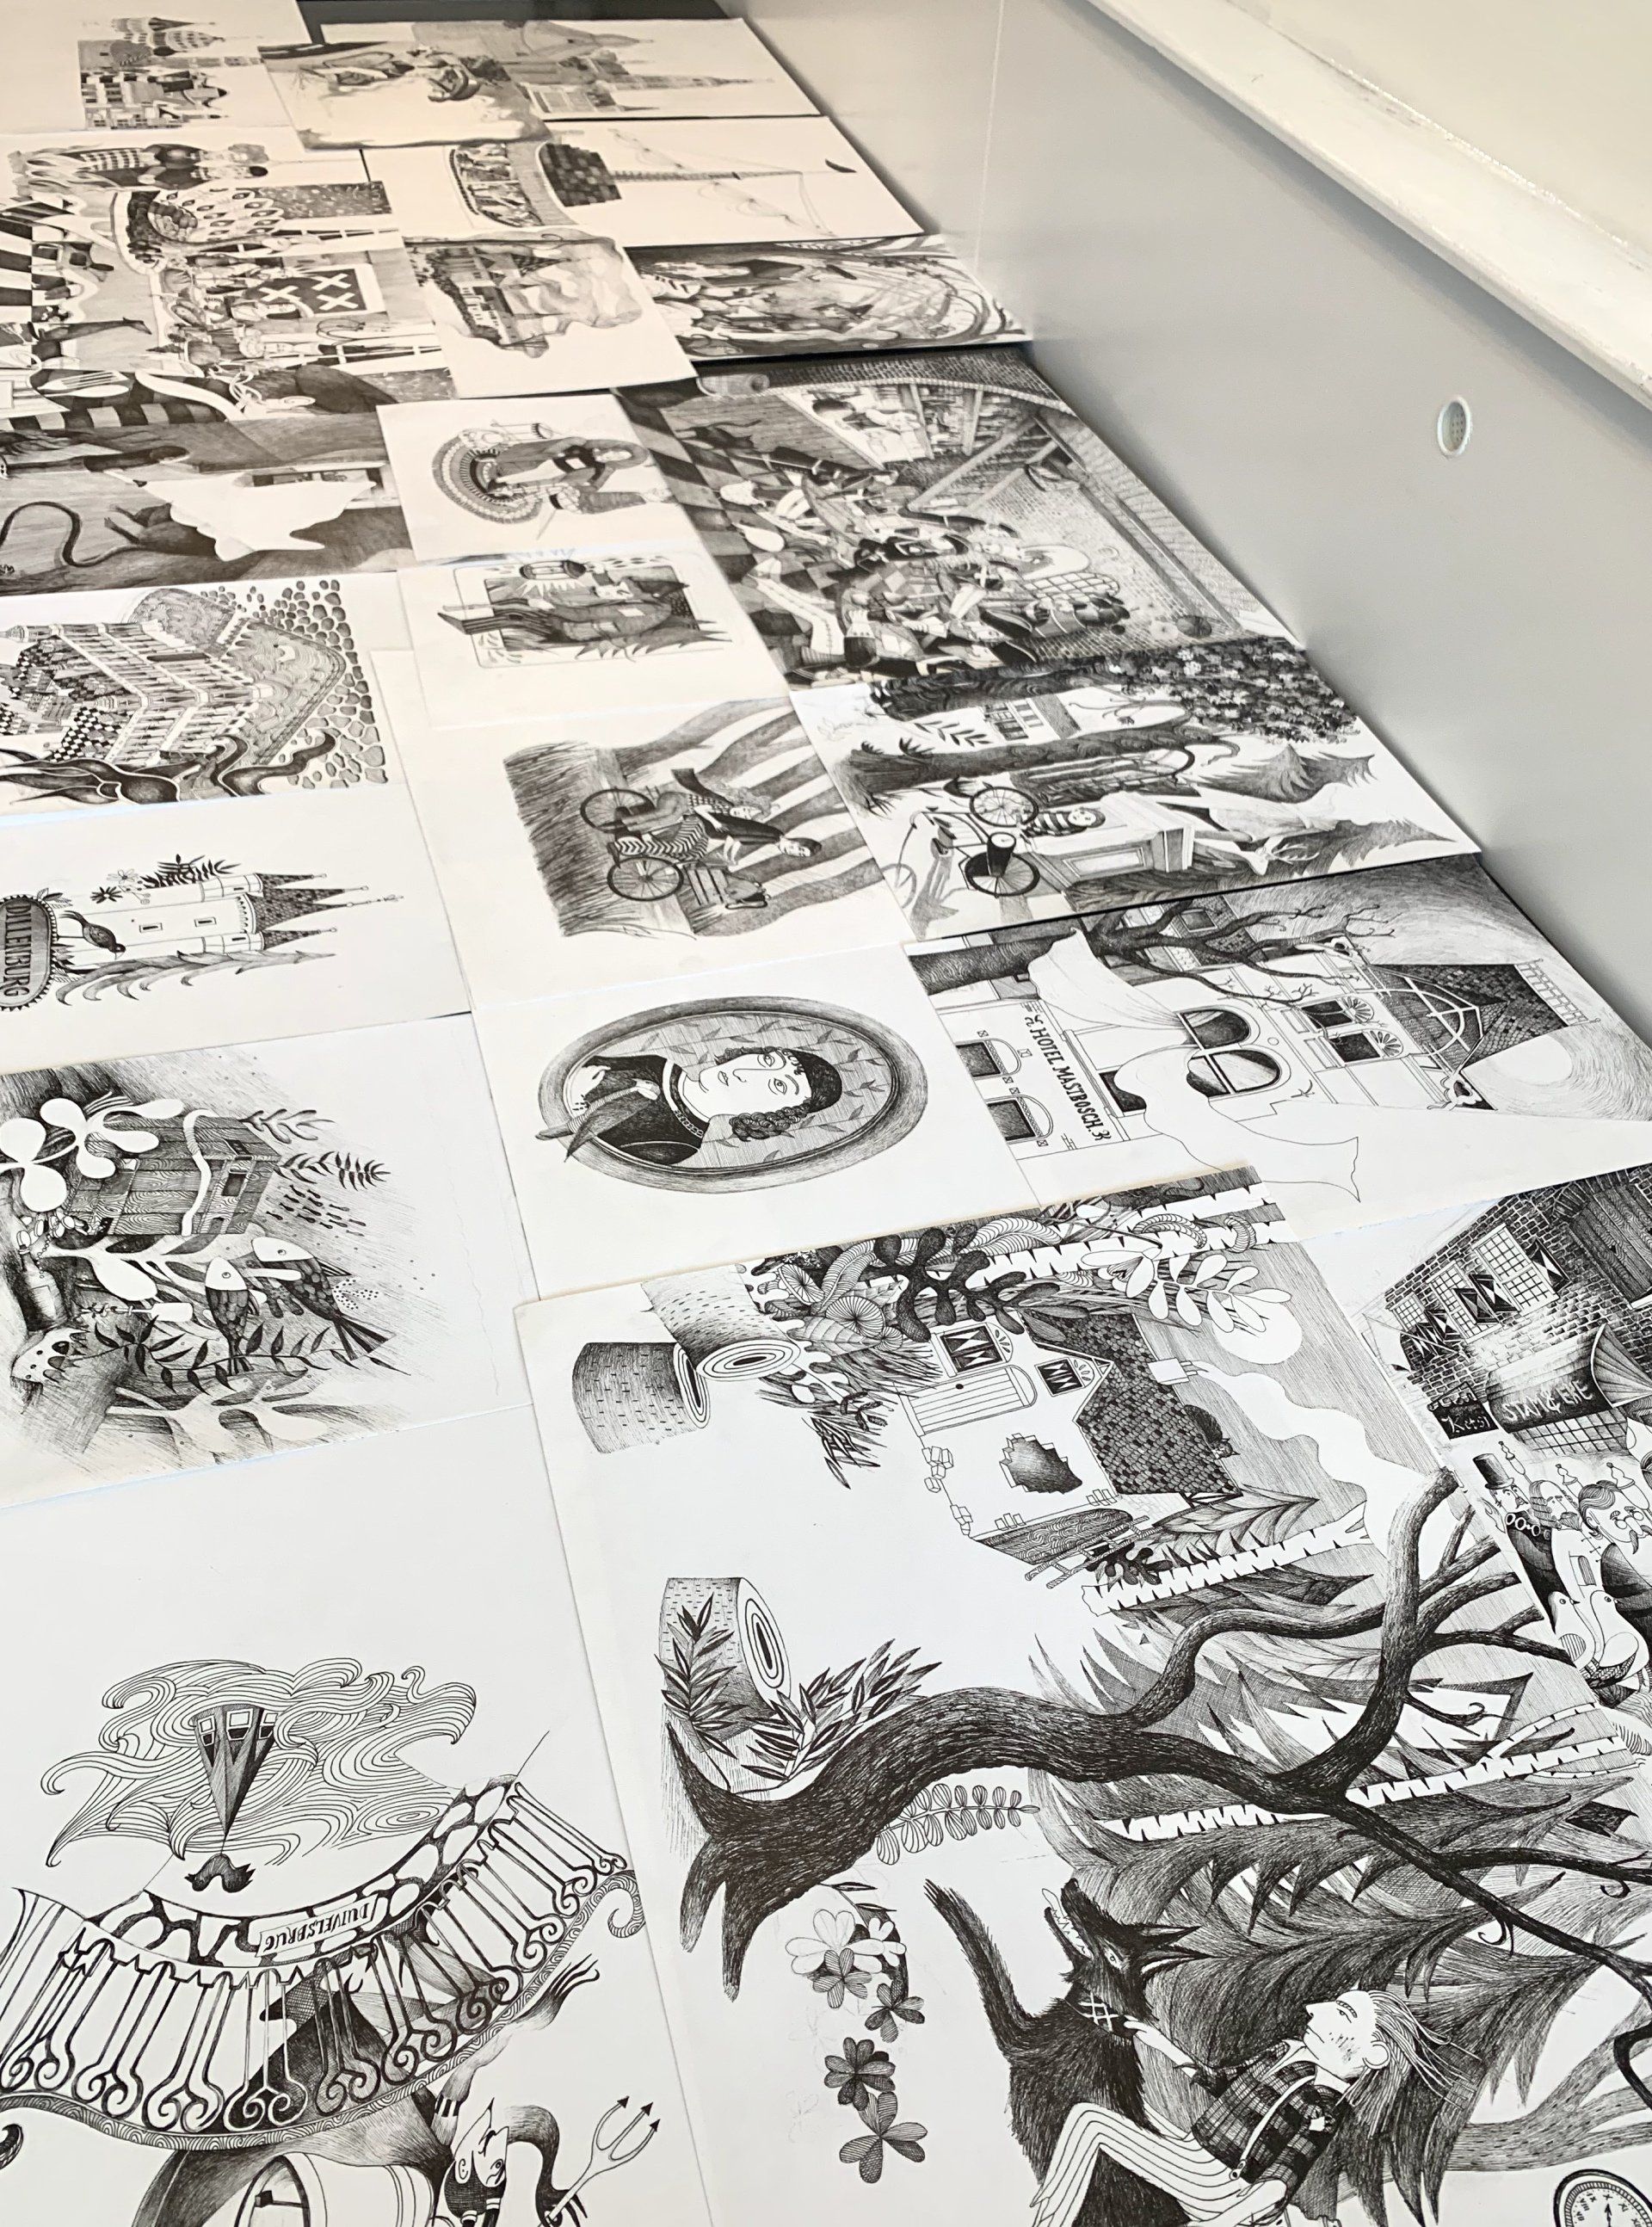 Overview of highly detailed black and white illustrations